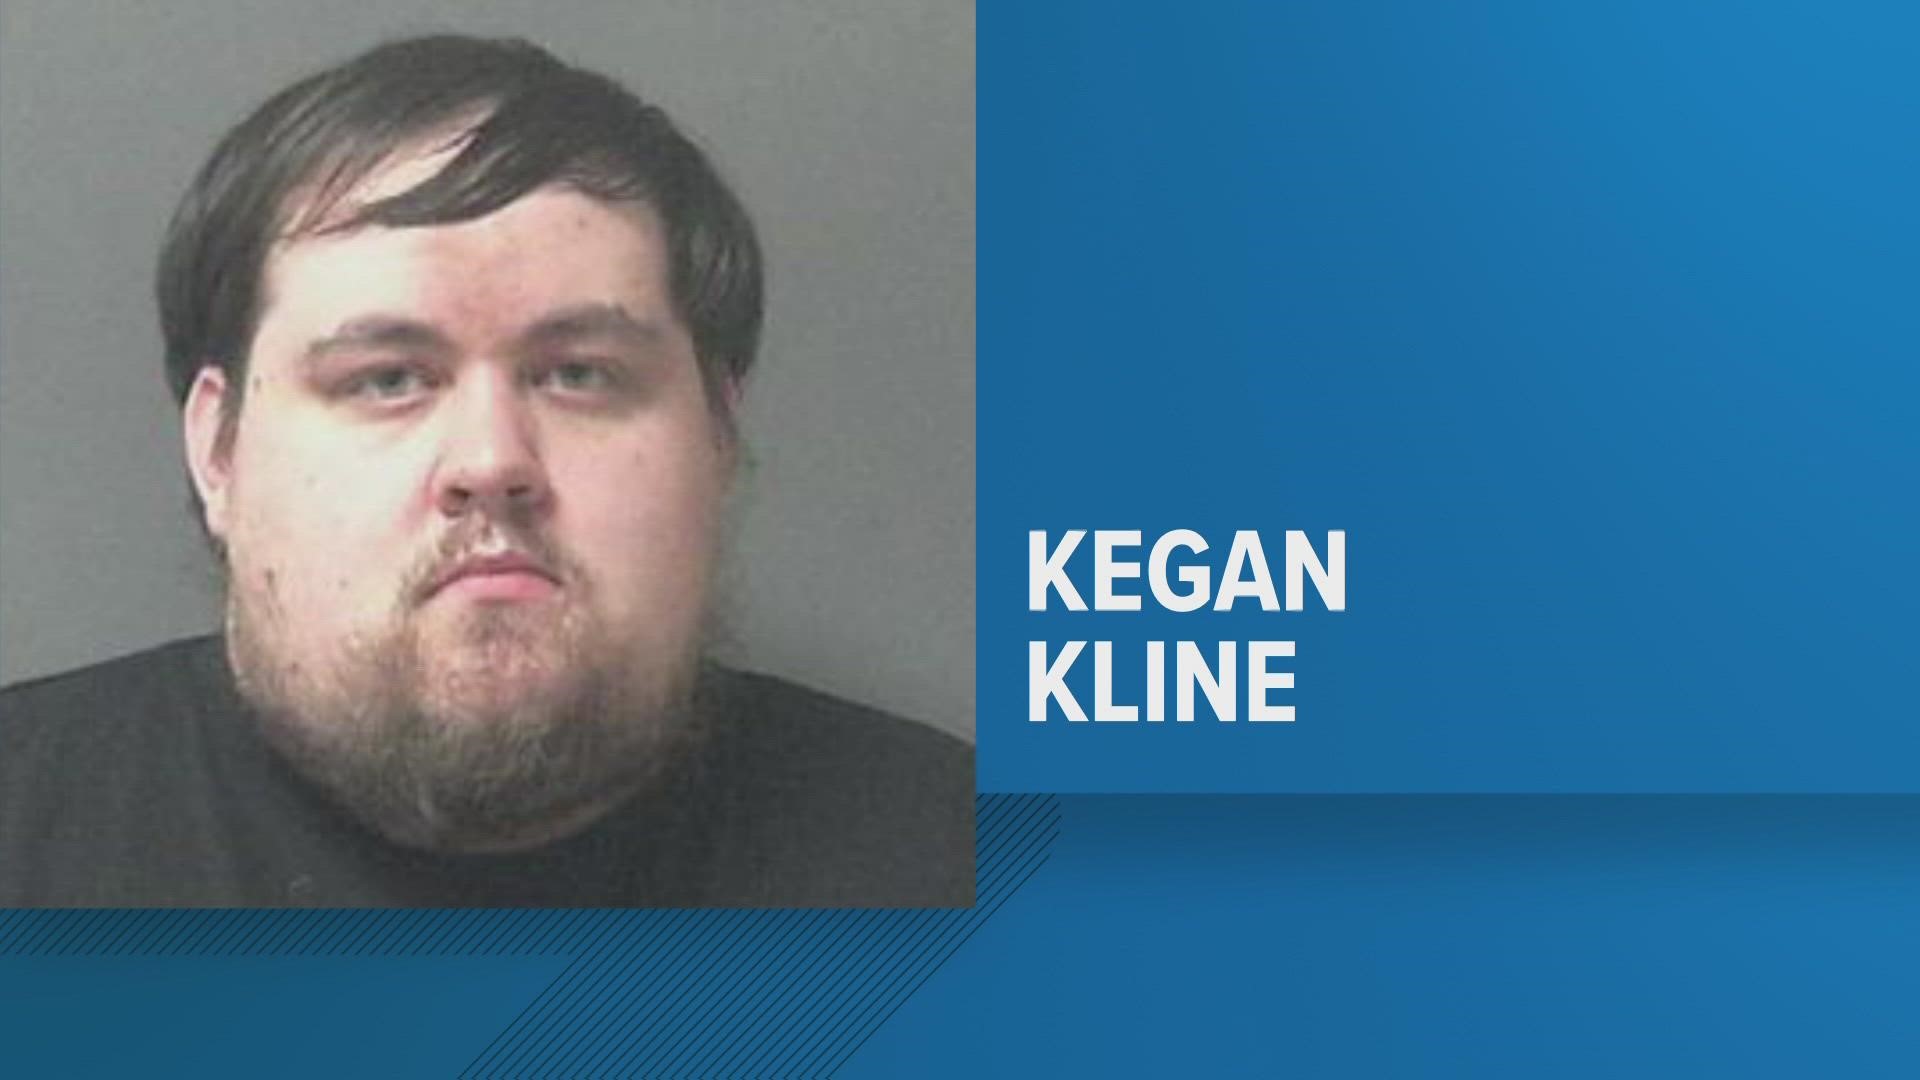 Kegan Kline will not be headed to court tomorrow as planned.